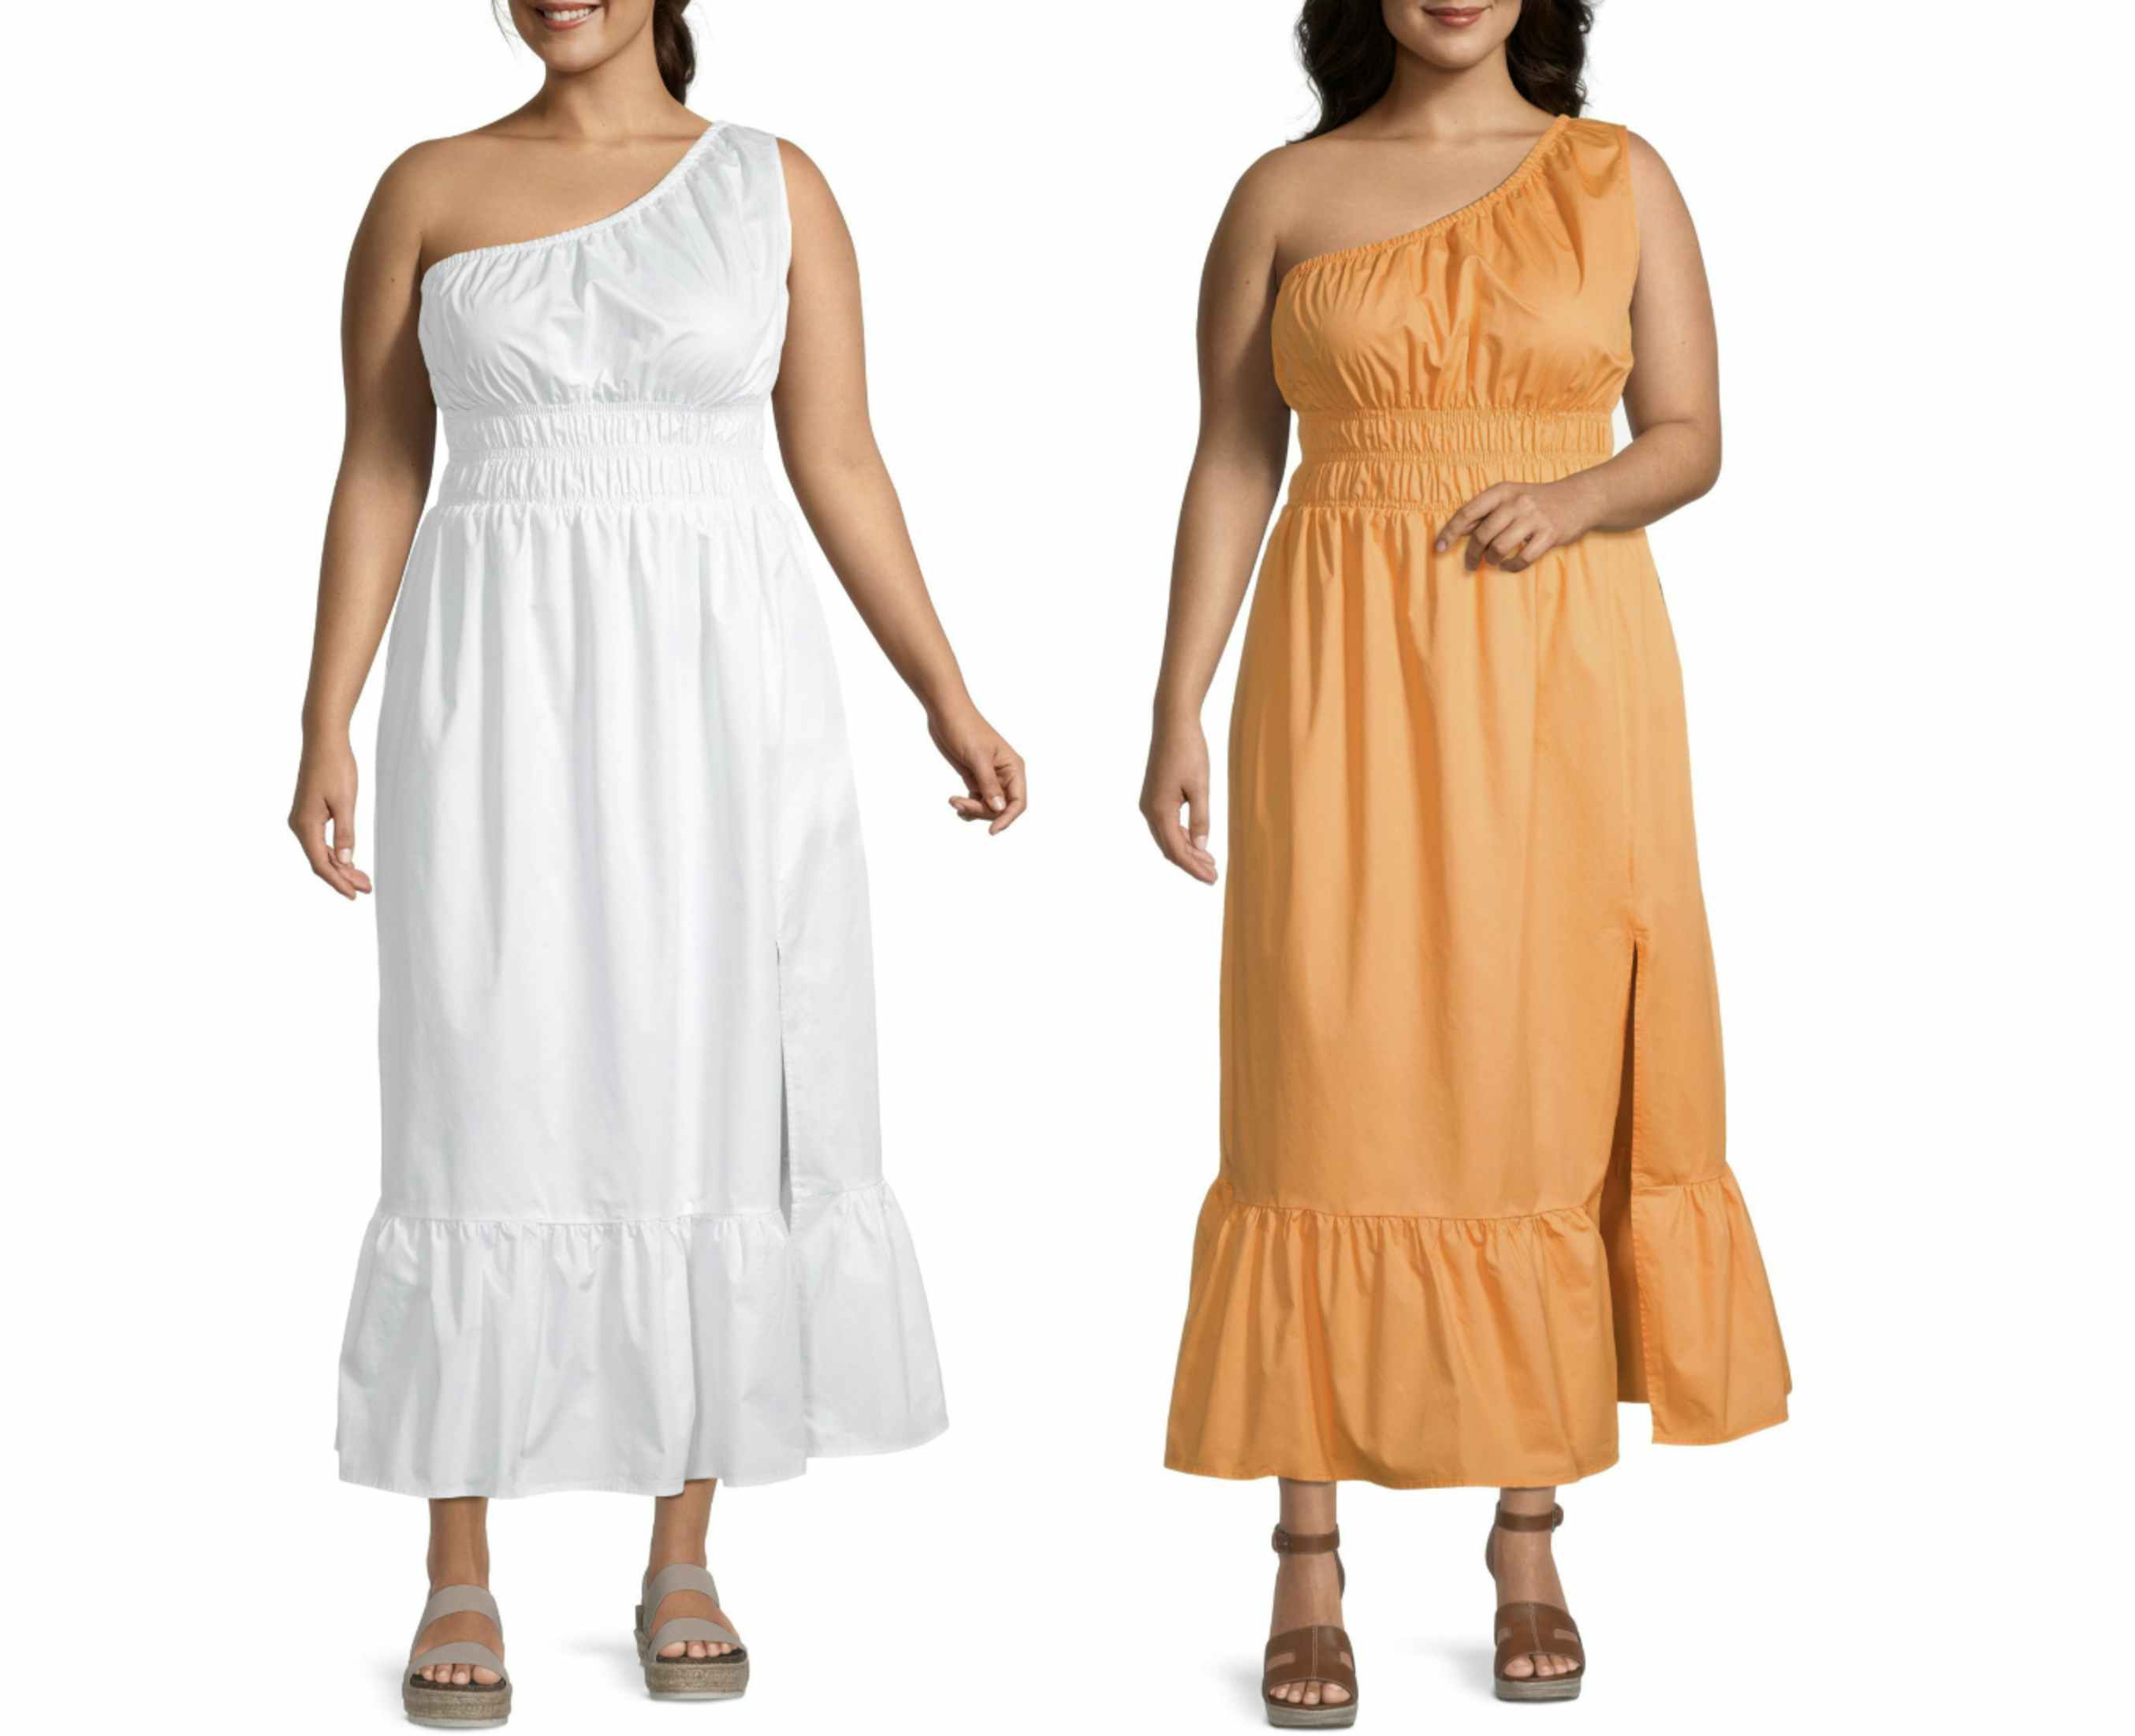 A JCPenney model wearing an a.n.a Plus Sleeveless Maxi Dress on a white background.